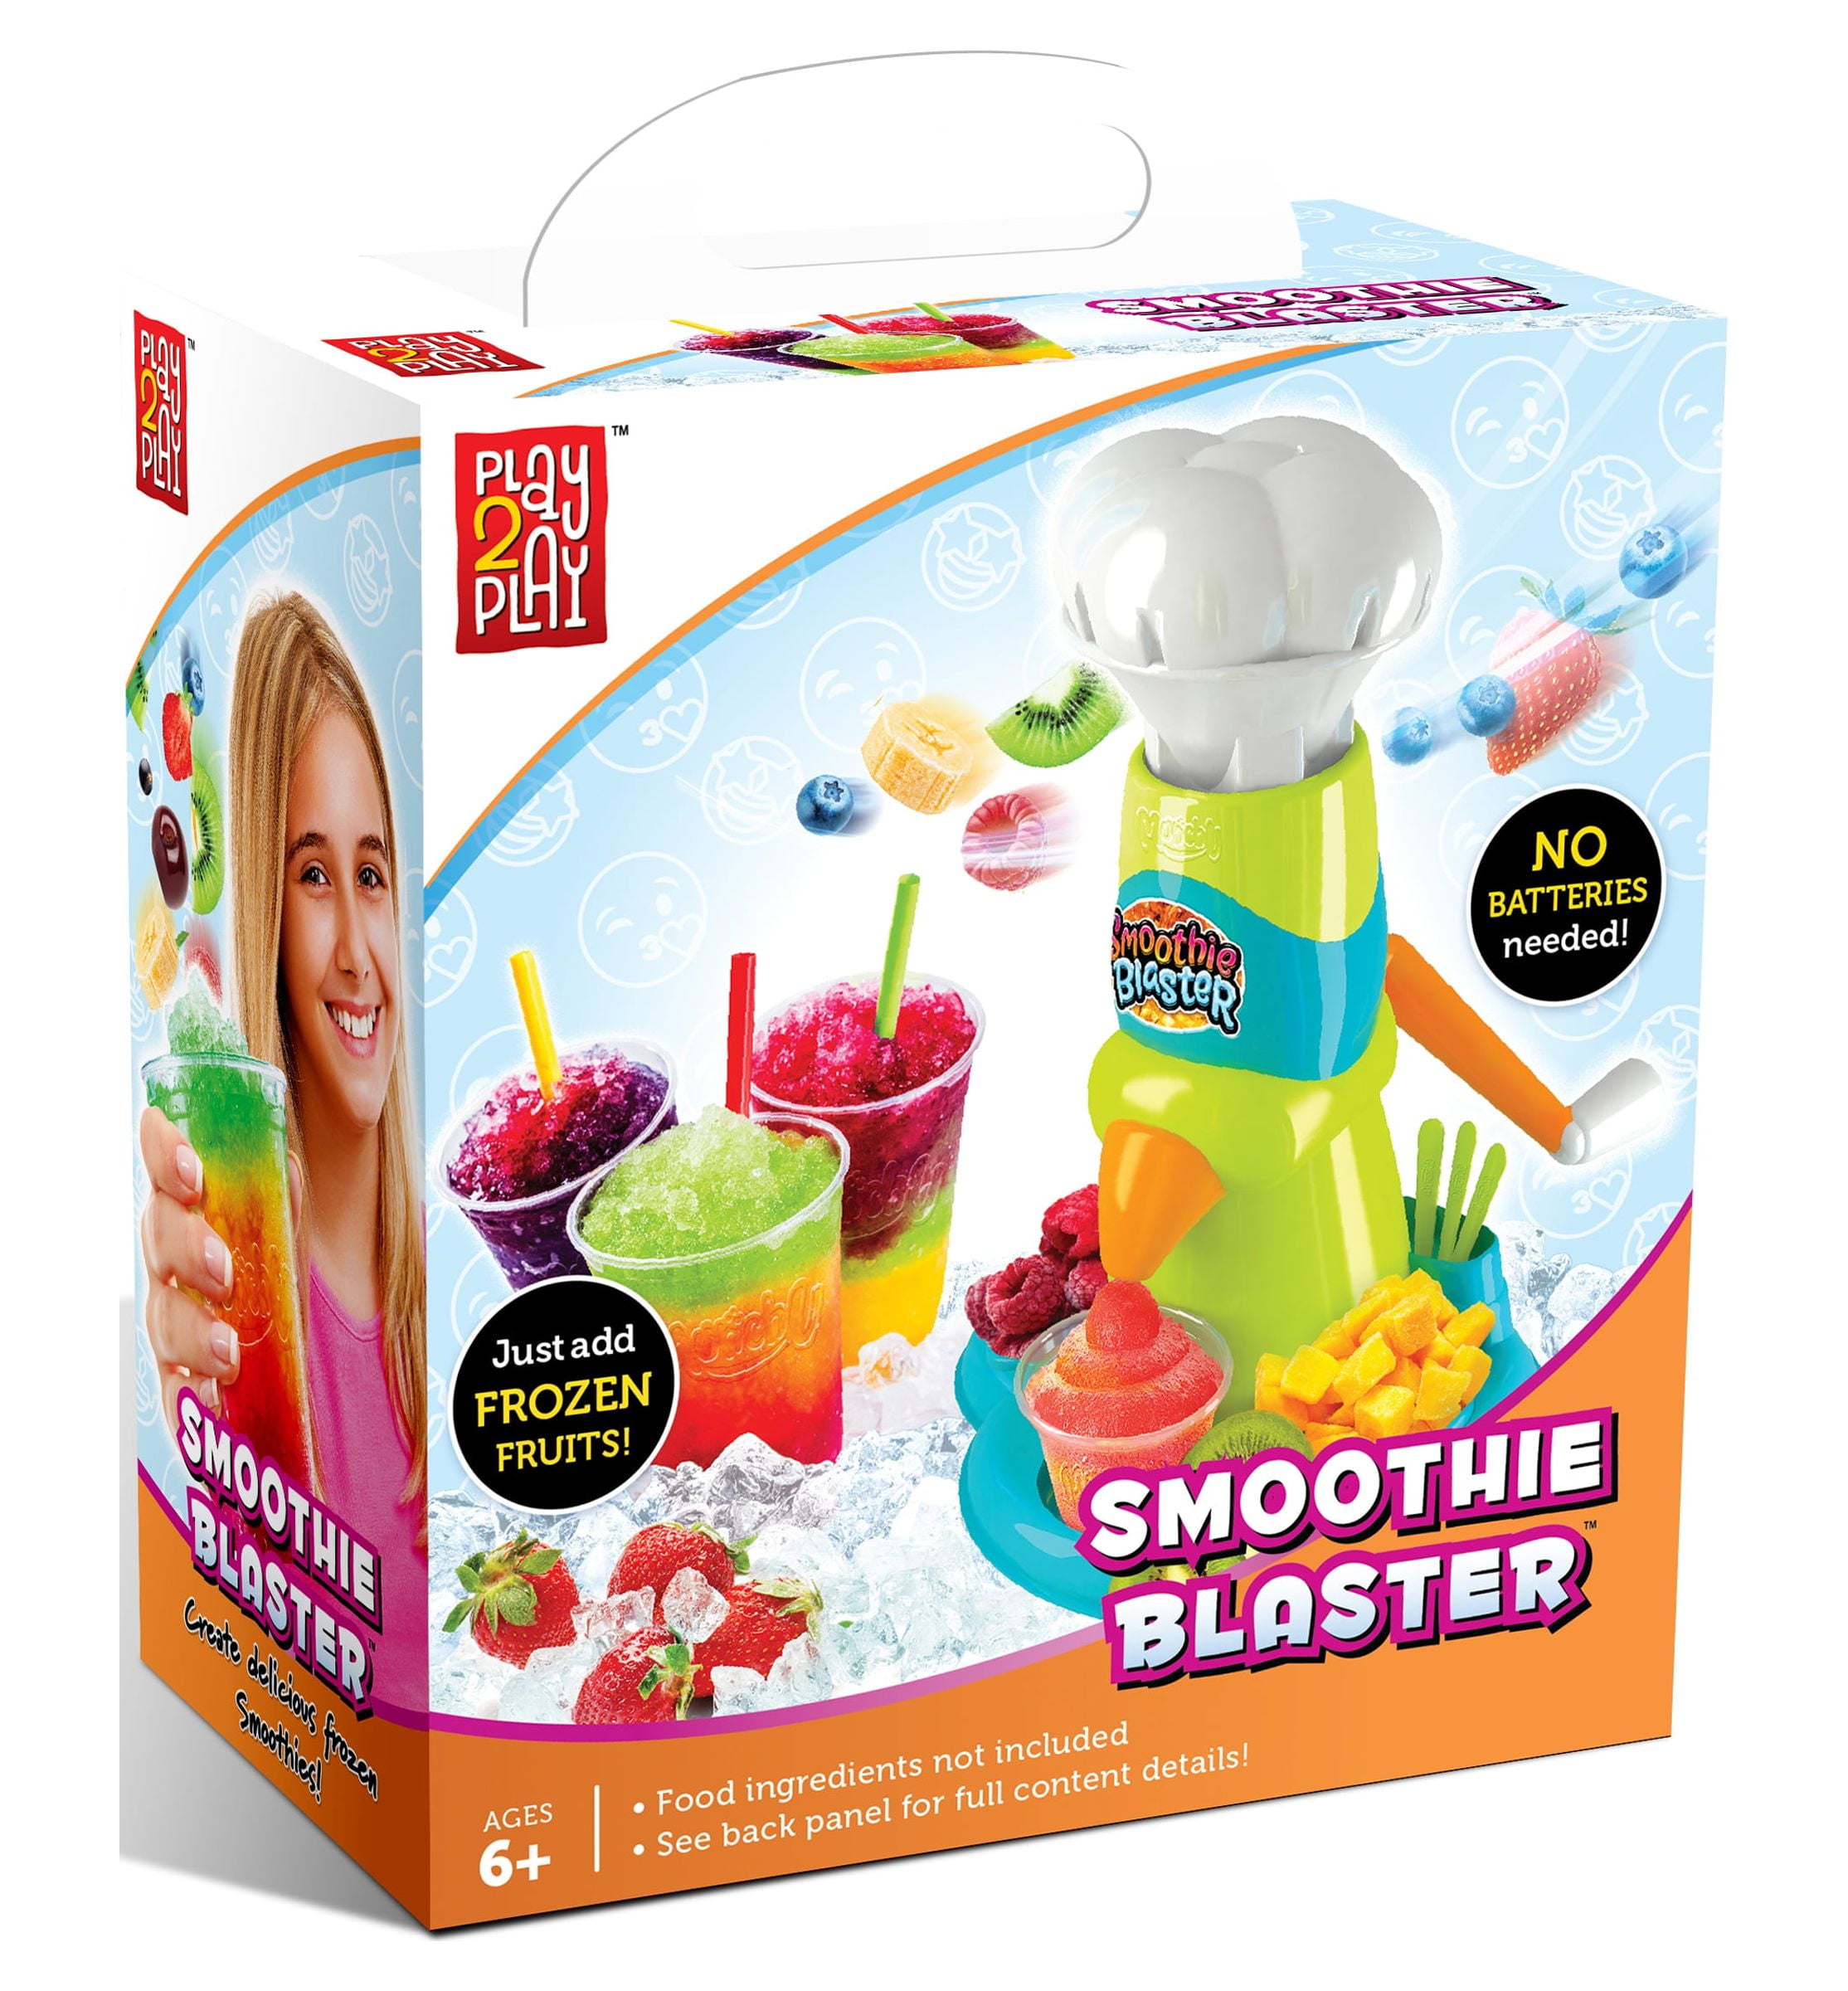 Play 2 Play Smoothie Blaster Maker Kit, 10 Piece Novelty Set, Children Ages  6+